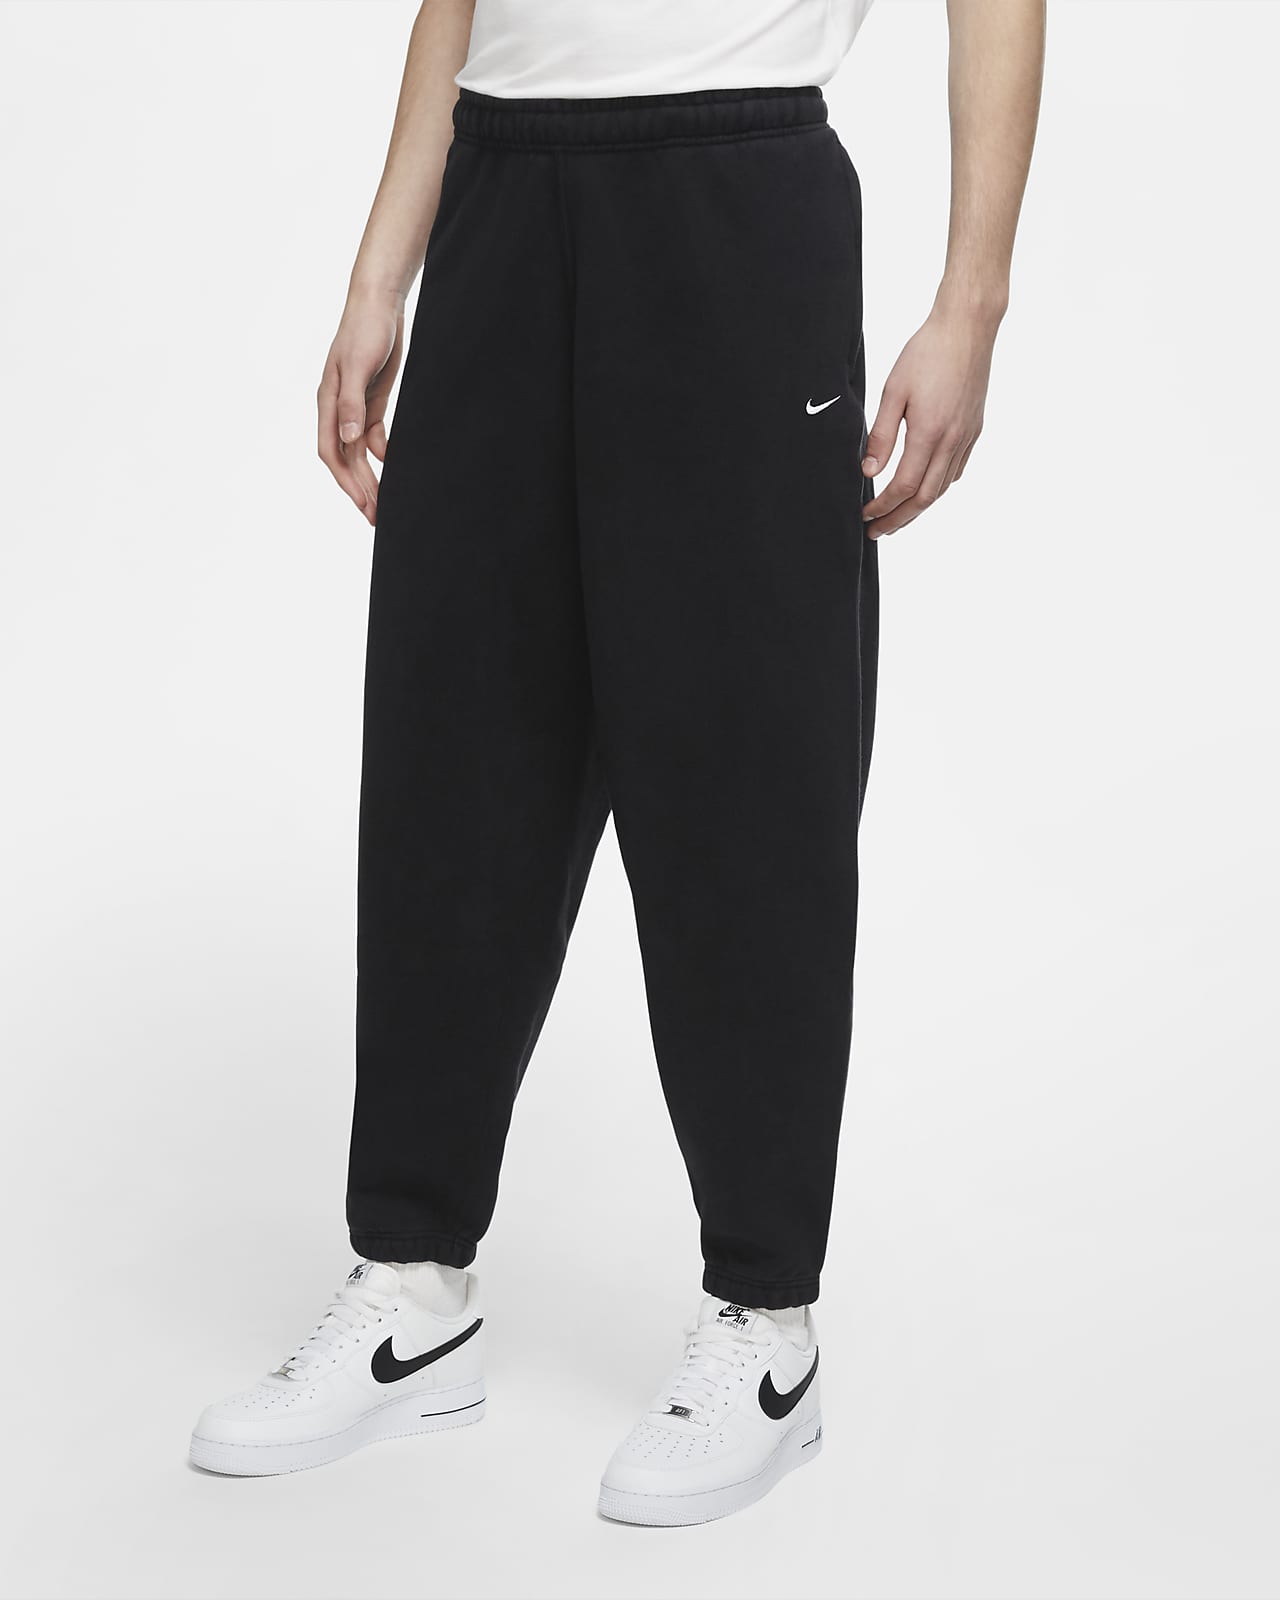 nikelab collection trousers